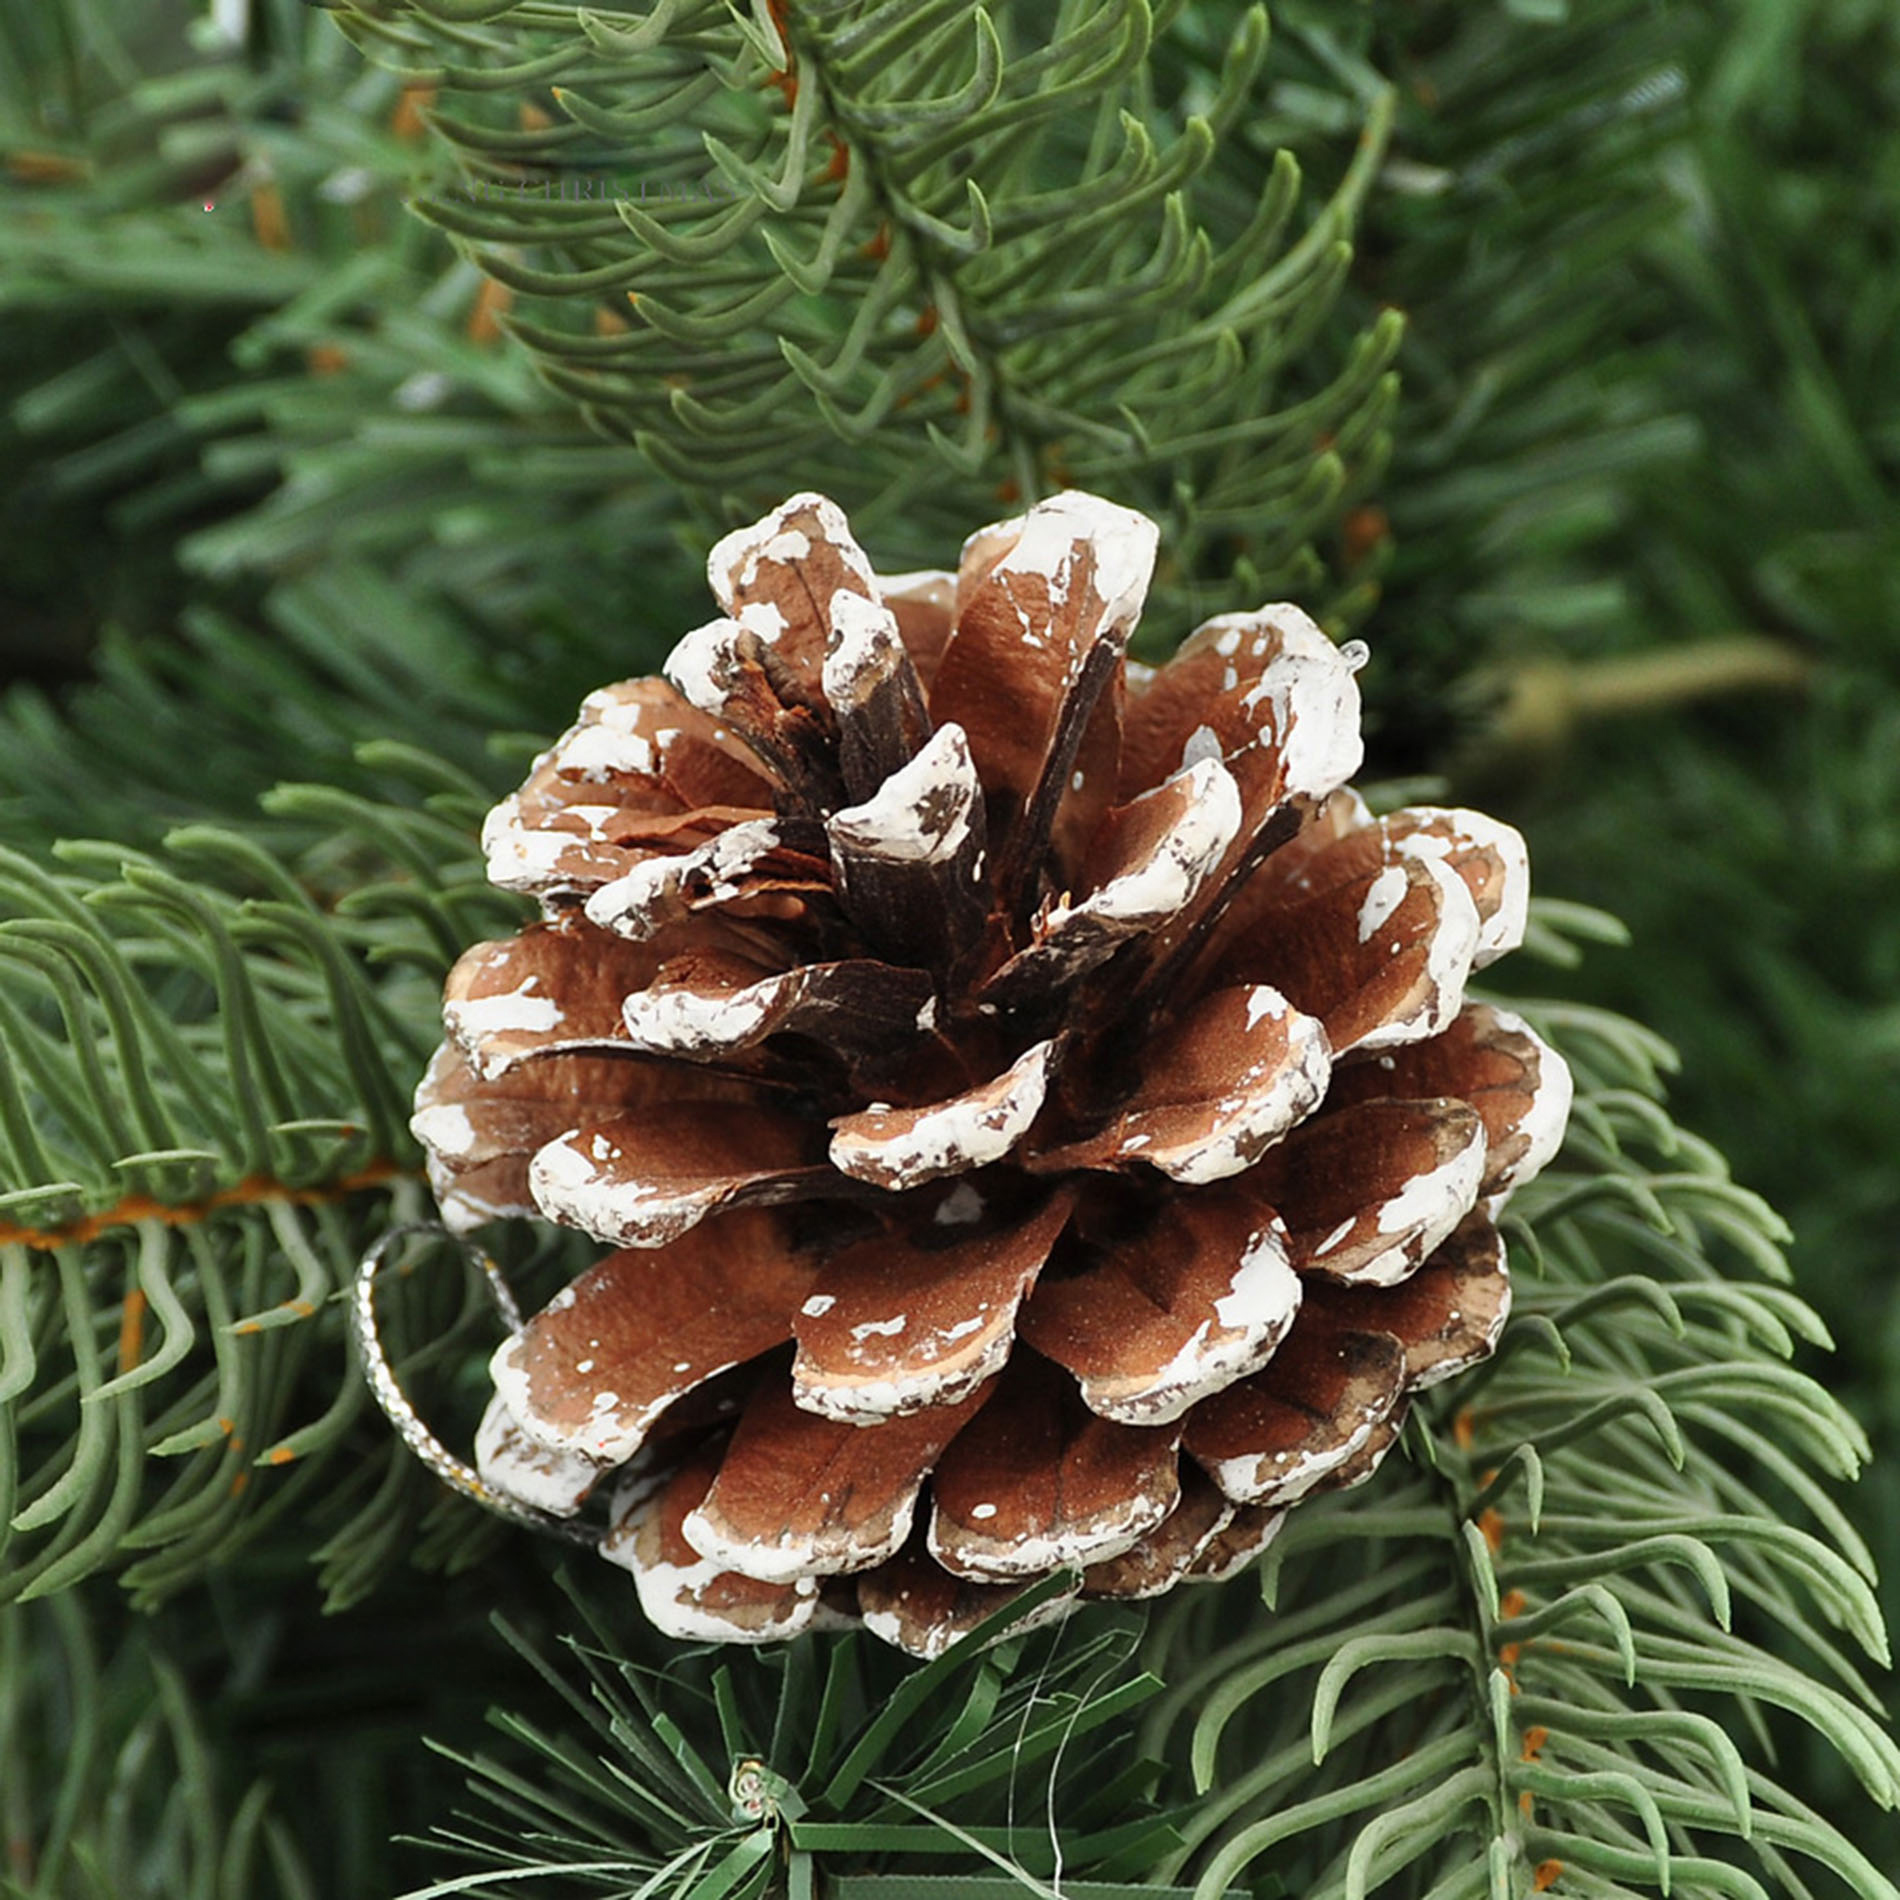 ids Home 8pcs Snow Pinecone Ornaments Christmas Tree Baubles Pine Cones Decorations